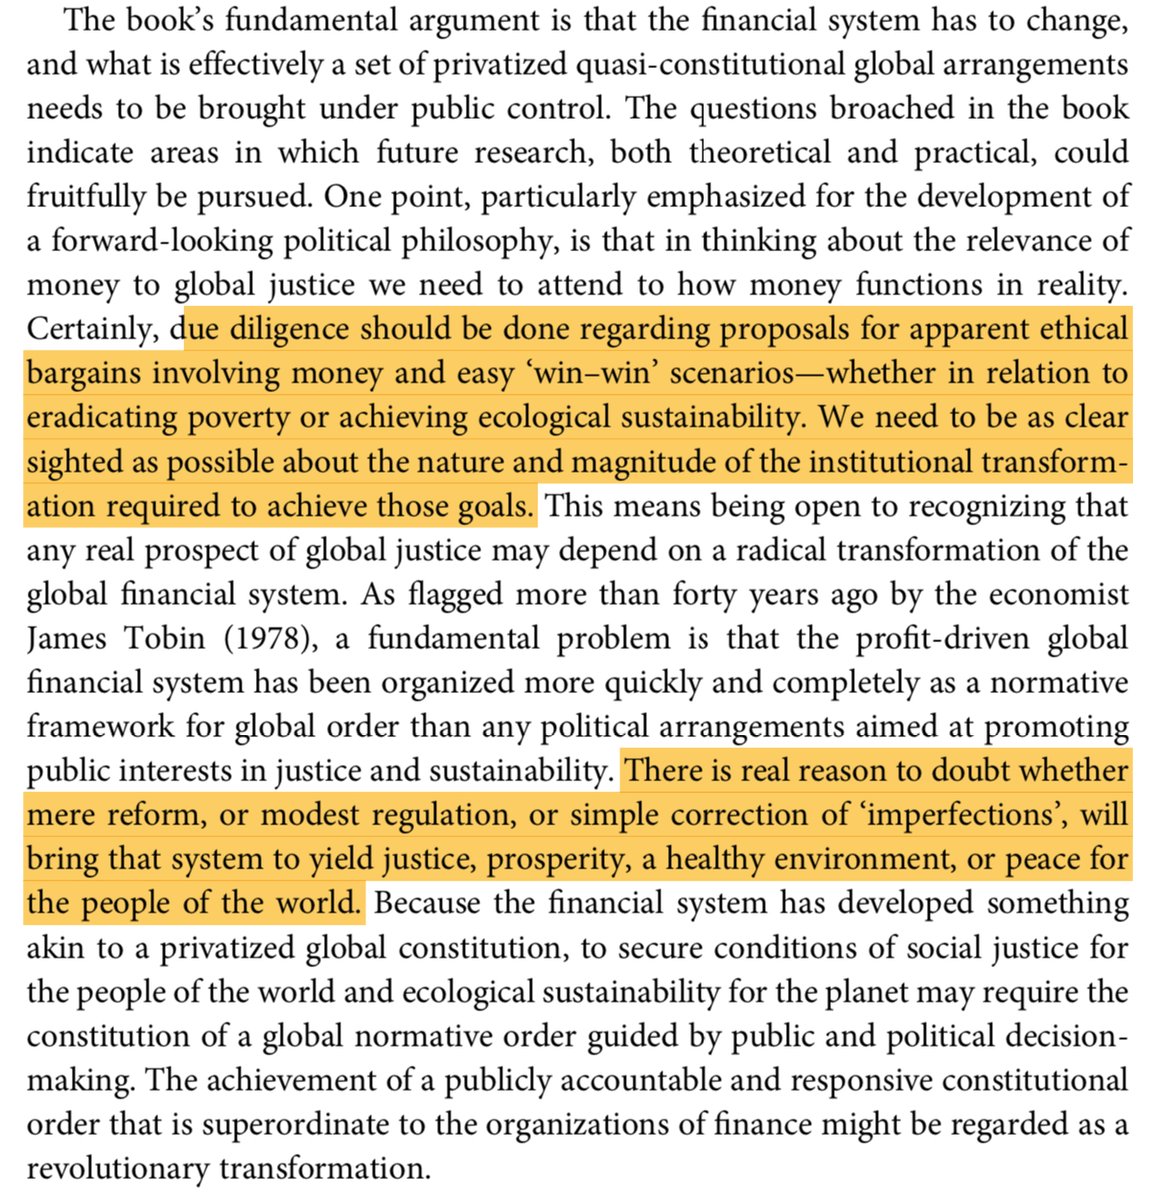 Quotes in this thread are from my recent book Global Justice and Finance (Oxford UP). It explains why eradicating poverty and achieving ecological sustainability cannot be achieved without a radical transformation of the socio-economic order globally.